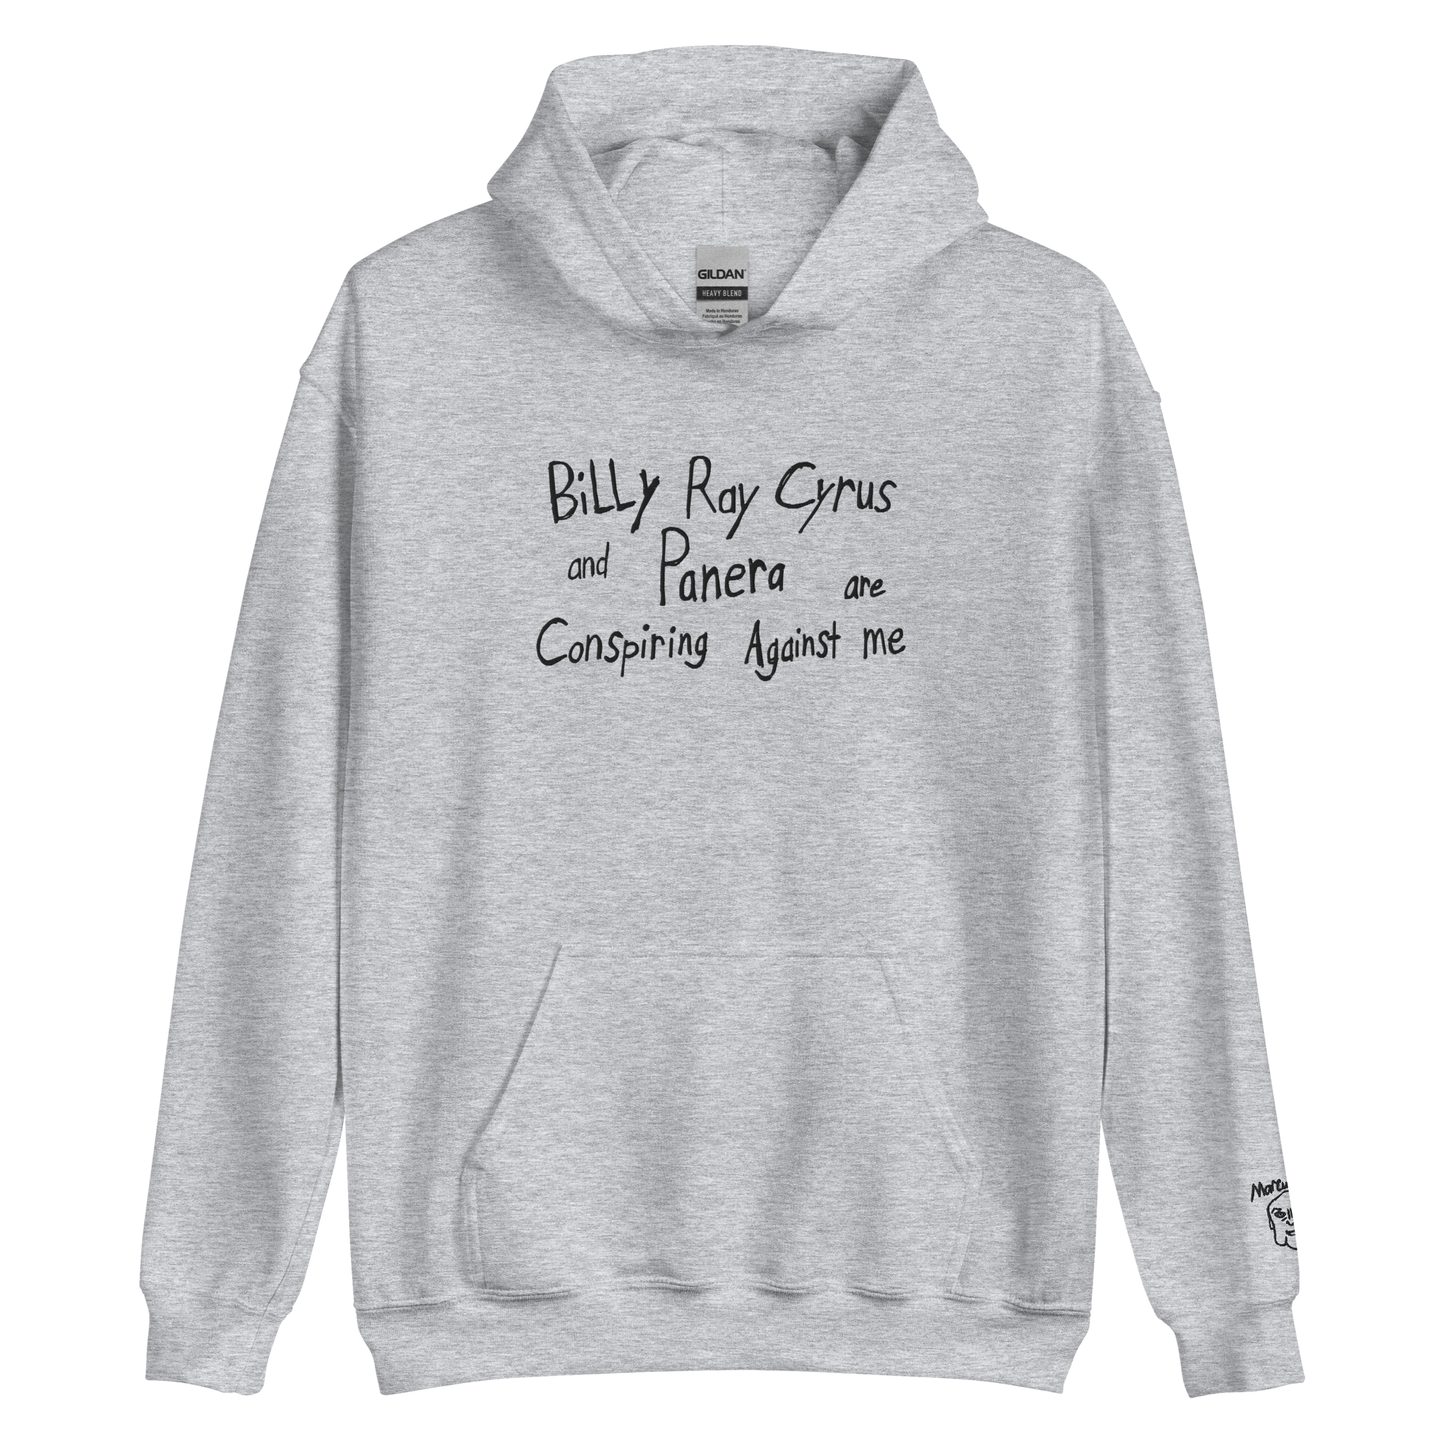 Billy Ray + Panera Embroidered Hoodie